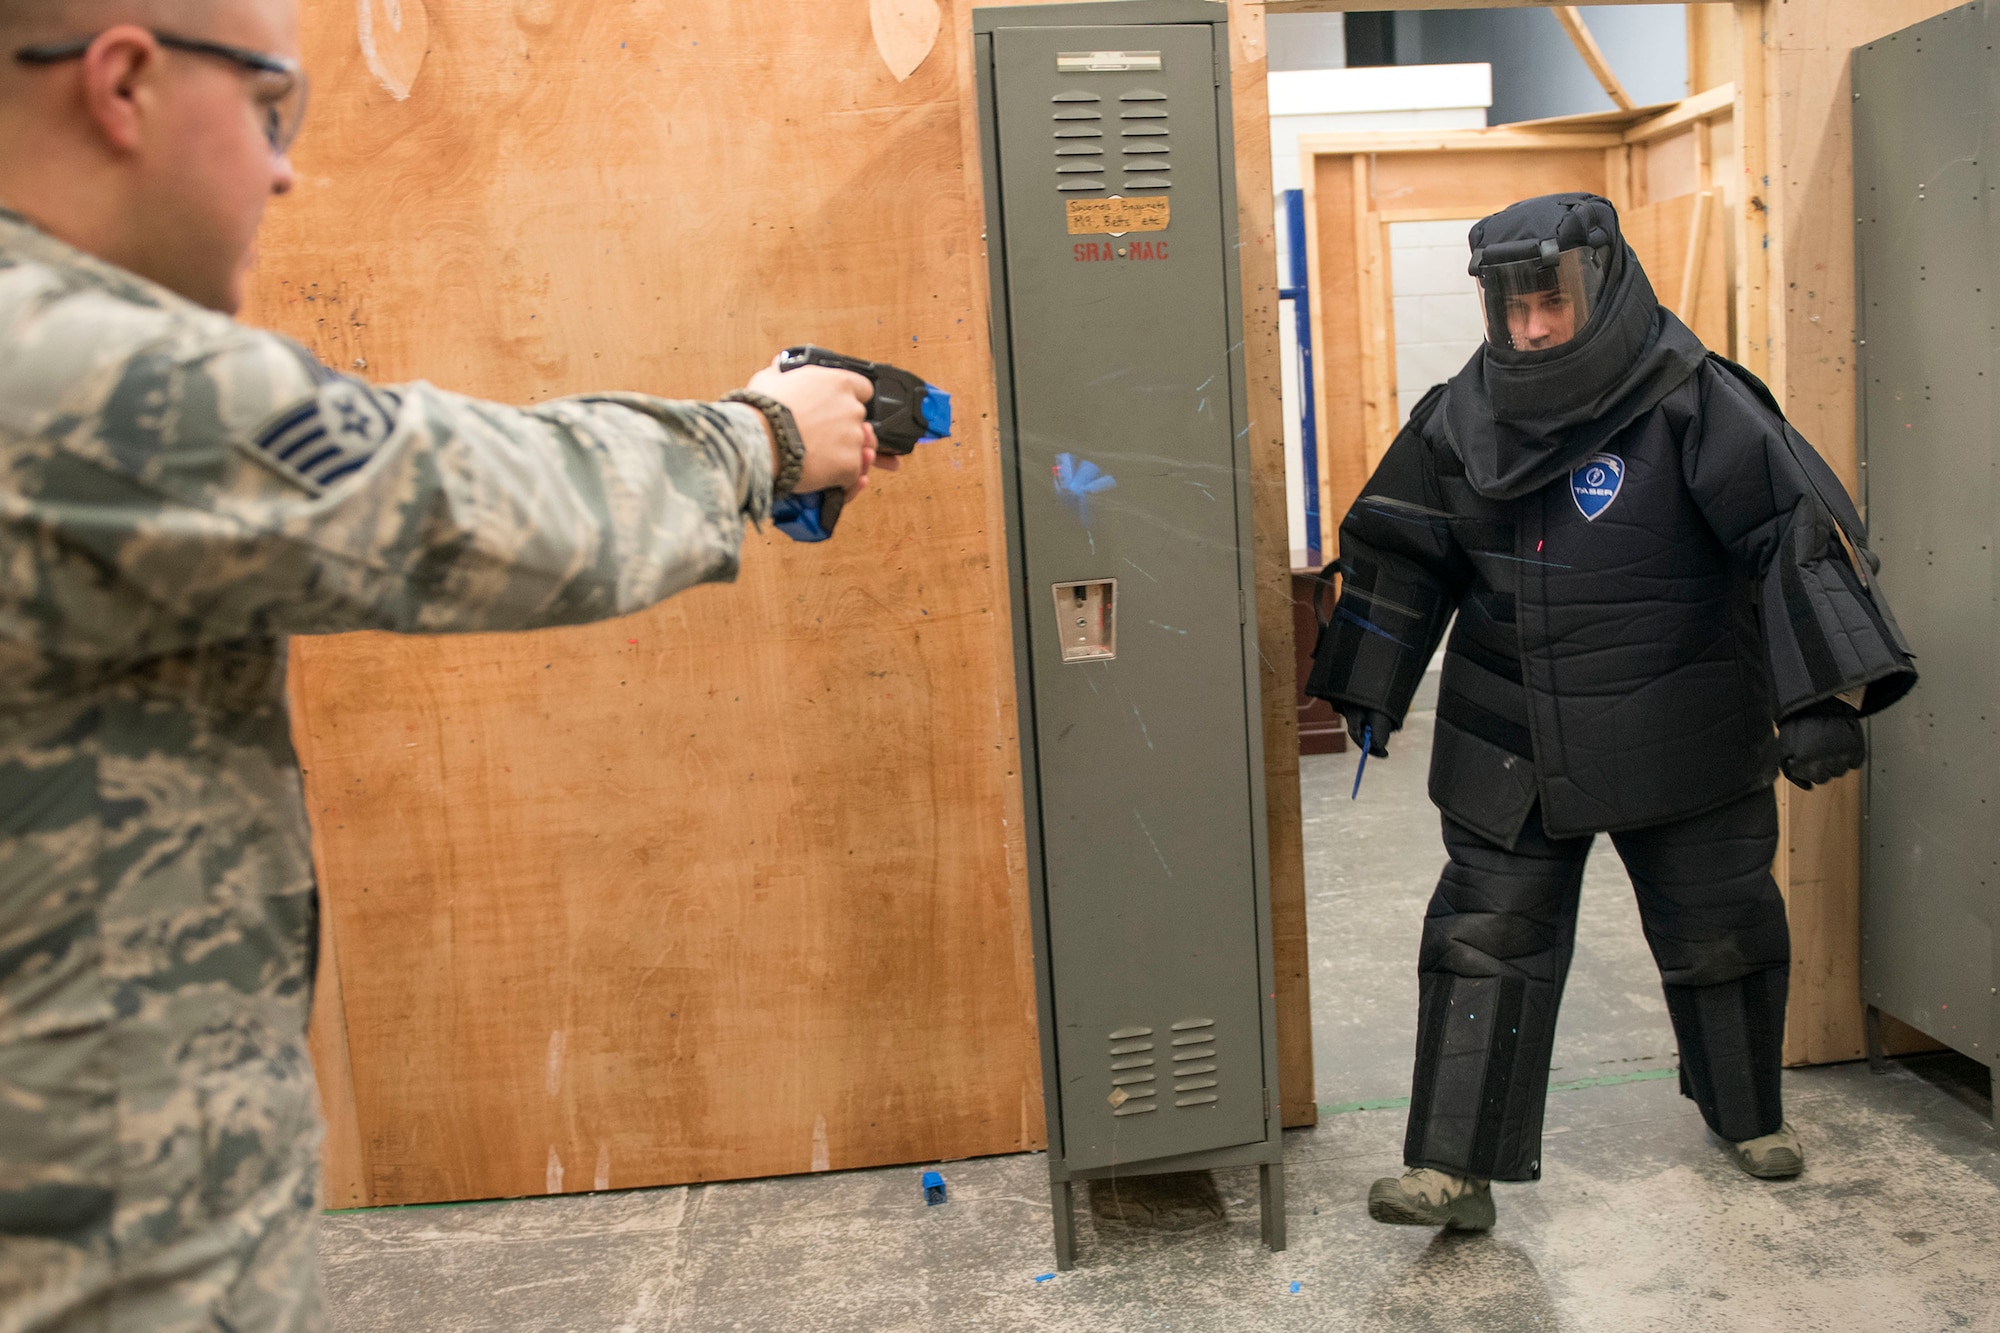 U.S. Air Force Staff Sgt. Thomas Hartline, 100th Security Force Squadron base defense operations controller, tases U.S. Air Force Senior Airman Kory Bruner, during training at RAF Mildenhall, England, Nov. 8, 2018. At the minimum, Airmen on duty are required to don a baton, and have the option to carry a Taser. (U.S. Air Force photo by Staff Sgt. Christine Groening)